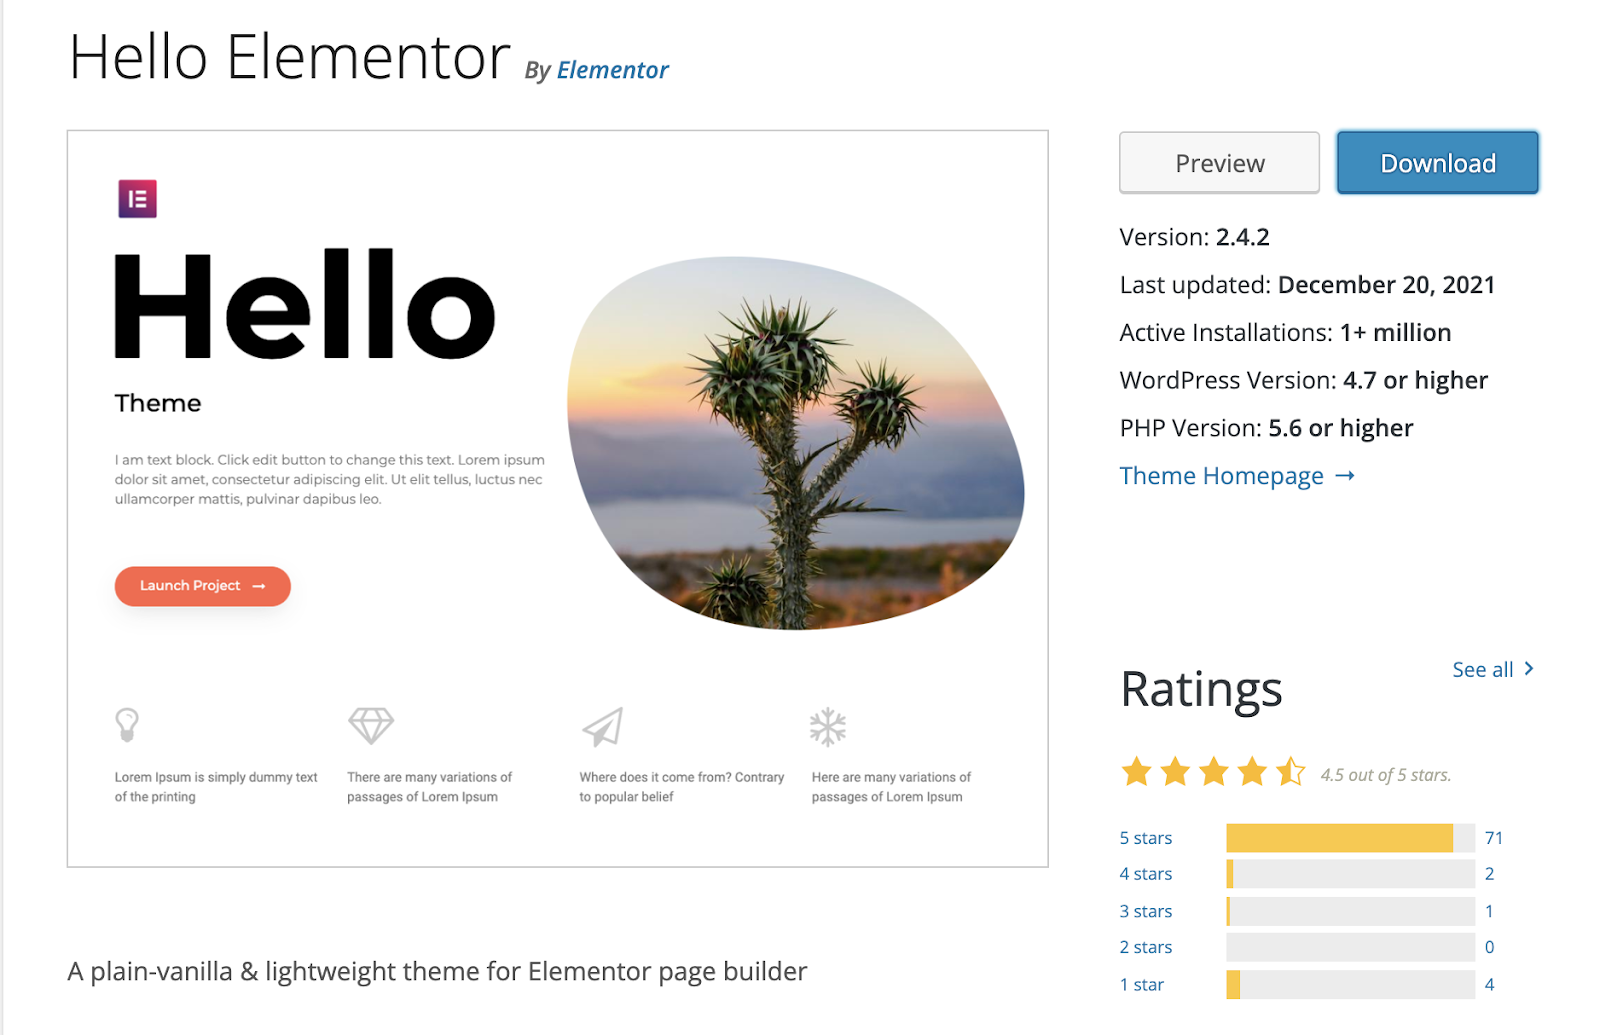 Hello Elementor Theme download page in the WordPress plugins library